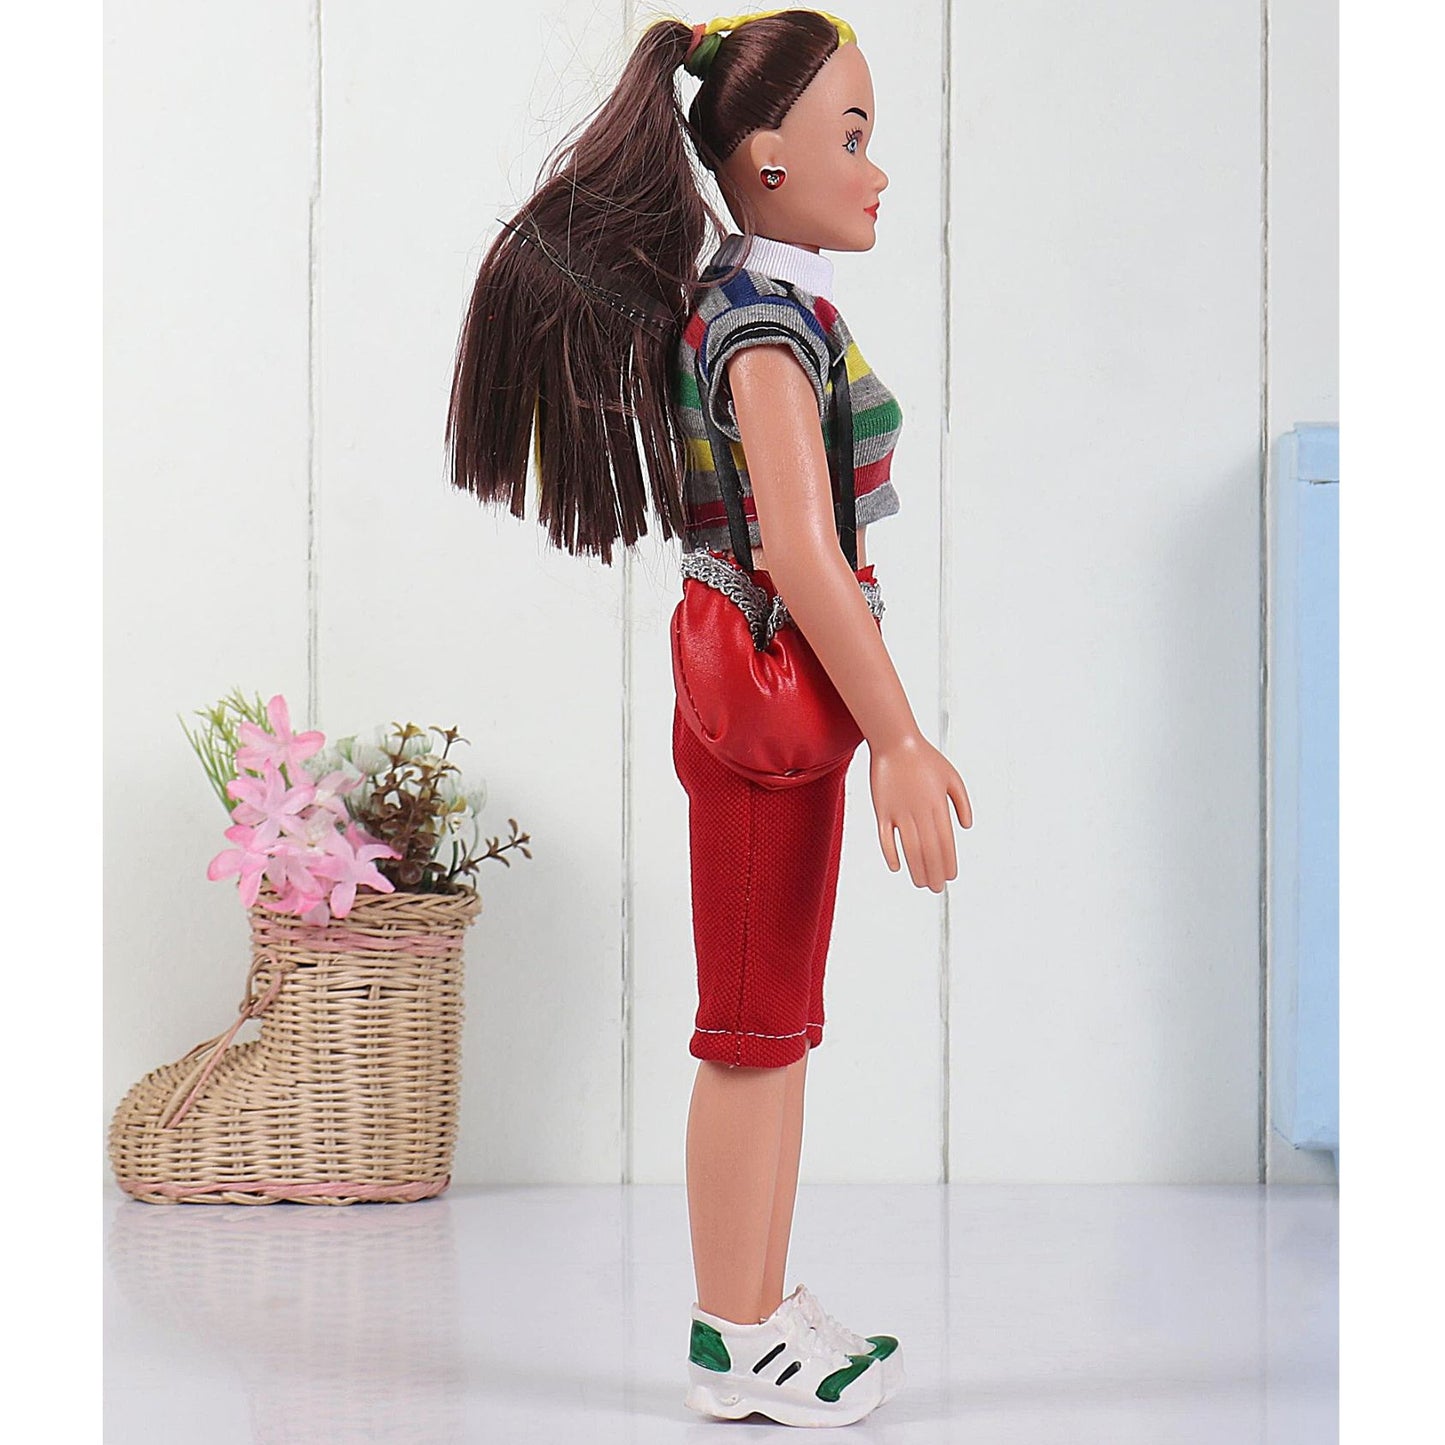 Speedage Katrina Fashion Doll for 3 to 10 Year Girls - Non-Toxic, BIS Certified, 40cm, Dress Color Varies